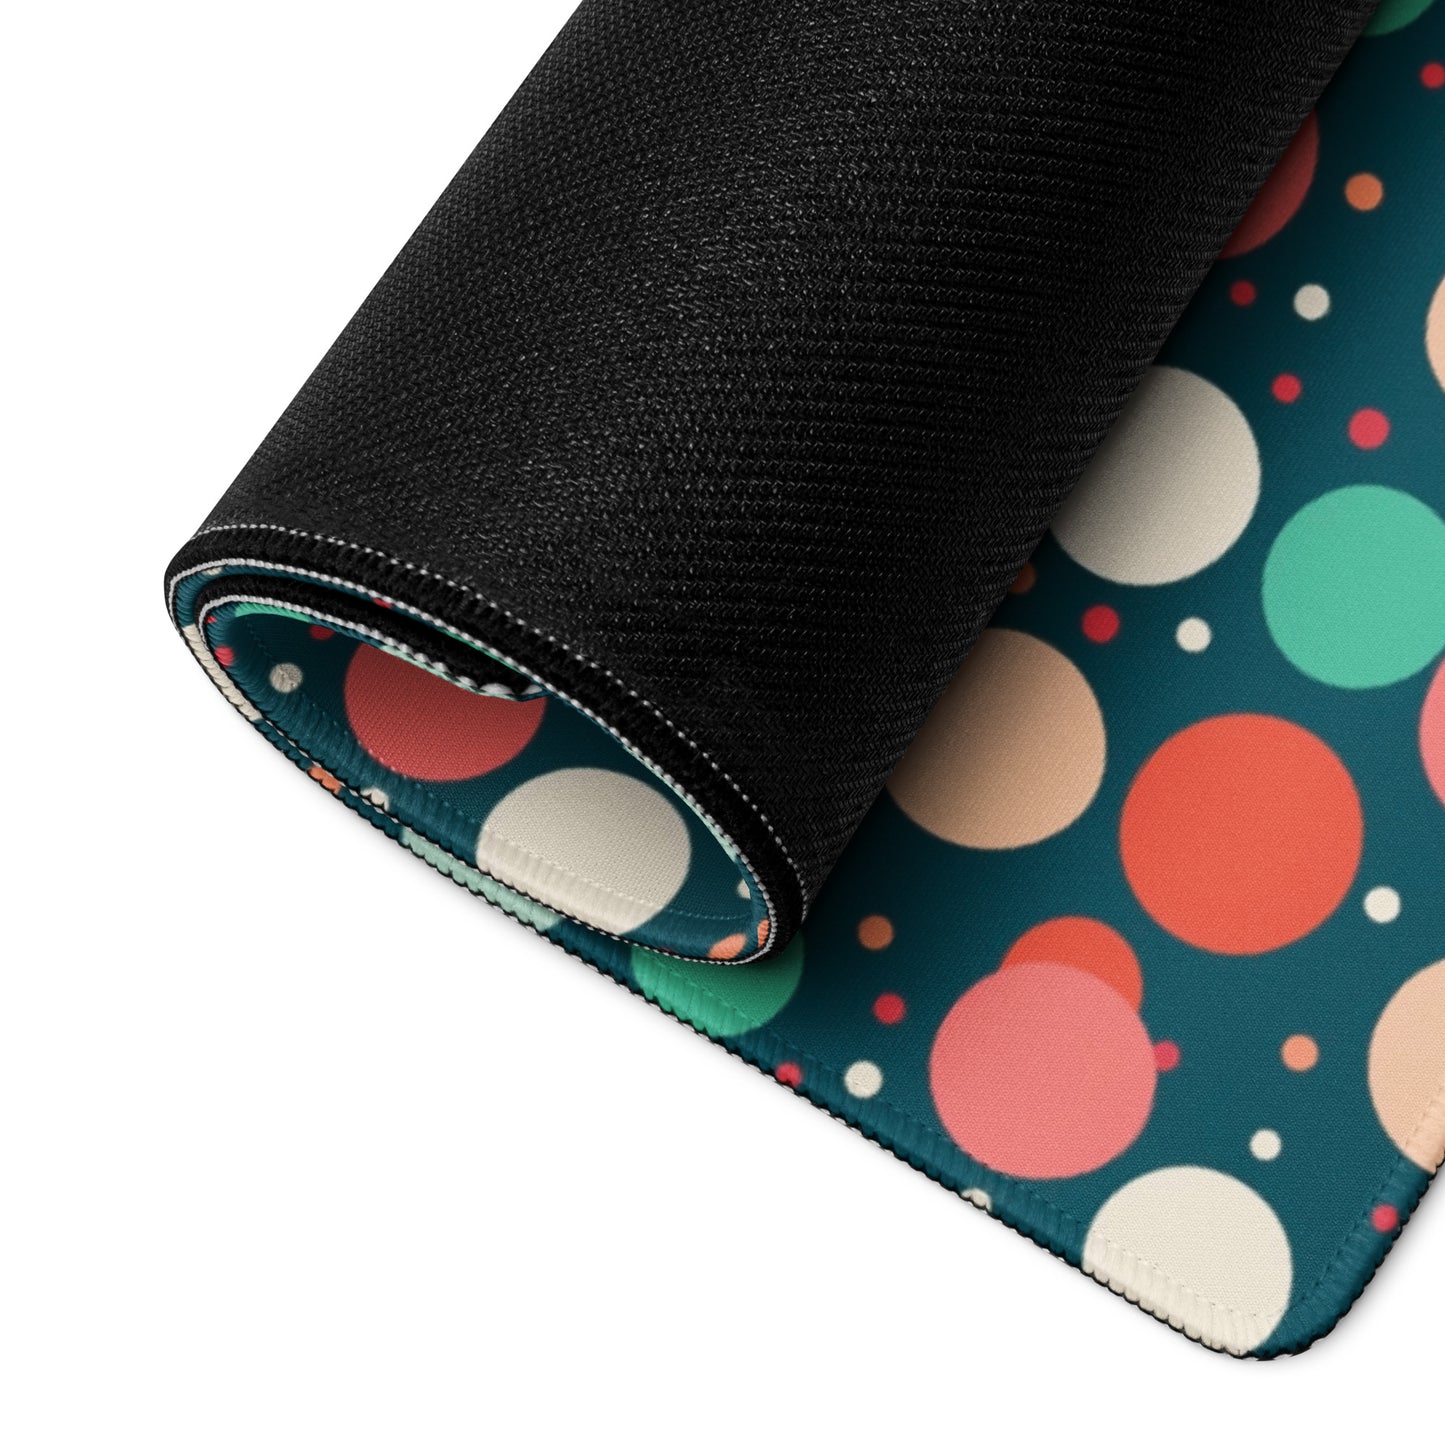  A 36" x 18" desk pad with red teal and yellow polka dot pattern rolled up.